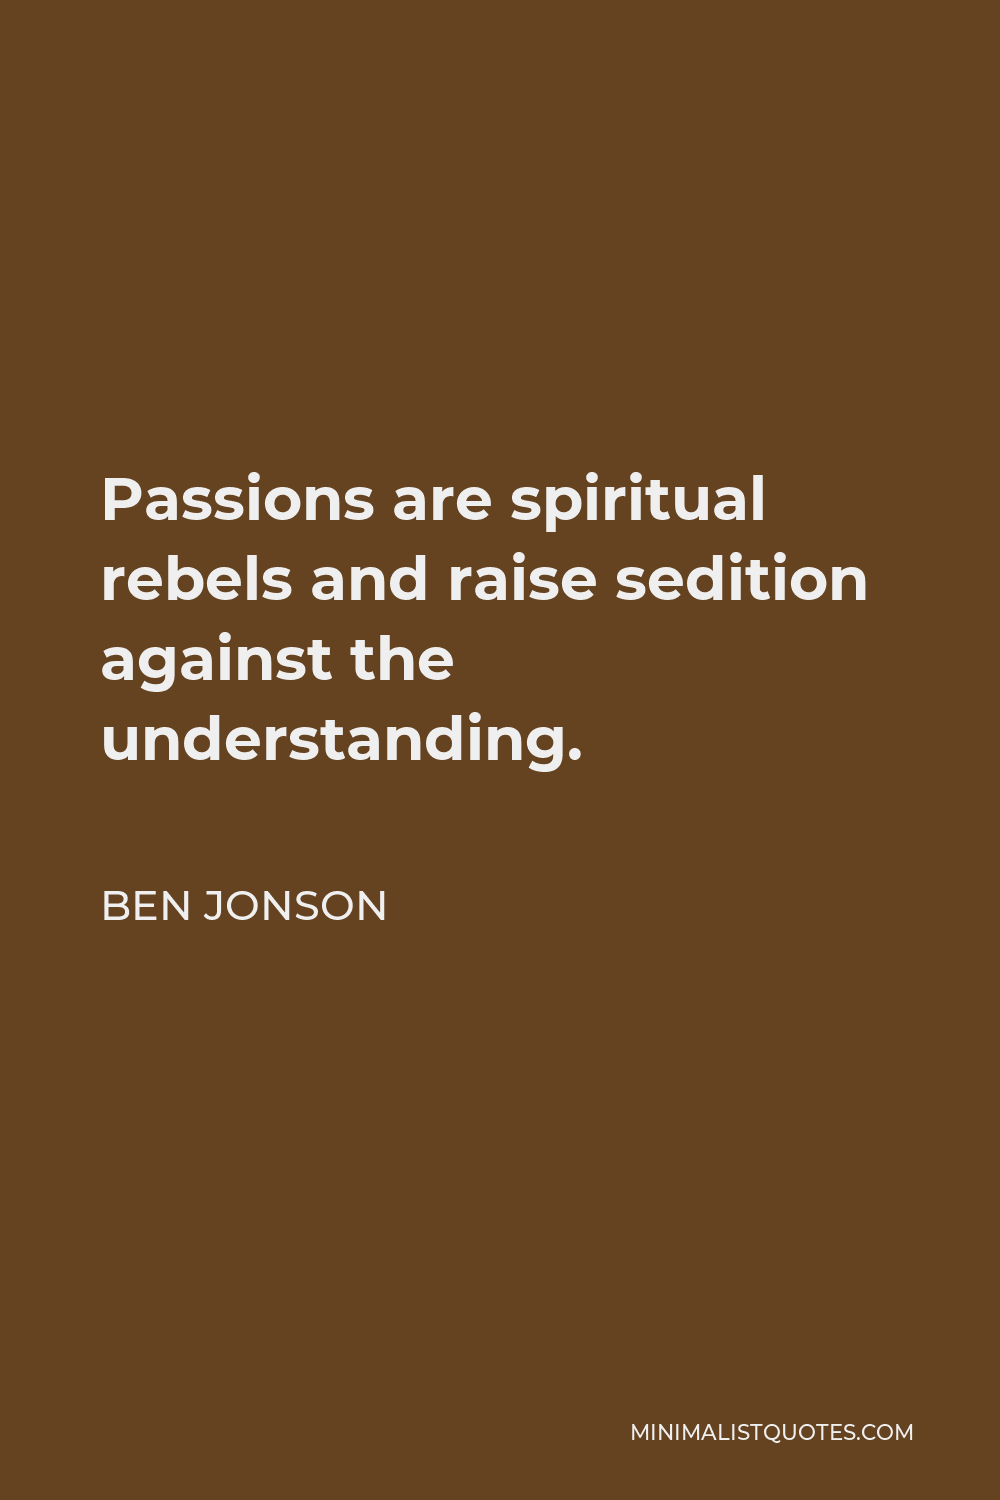 Ben Jonson Quote - Passions are spiritual rebels and raise sedition against the understanding.